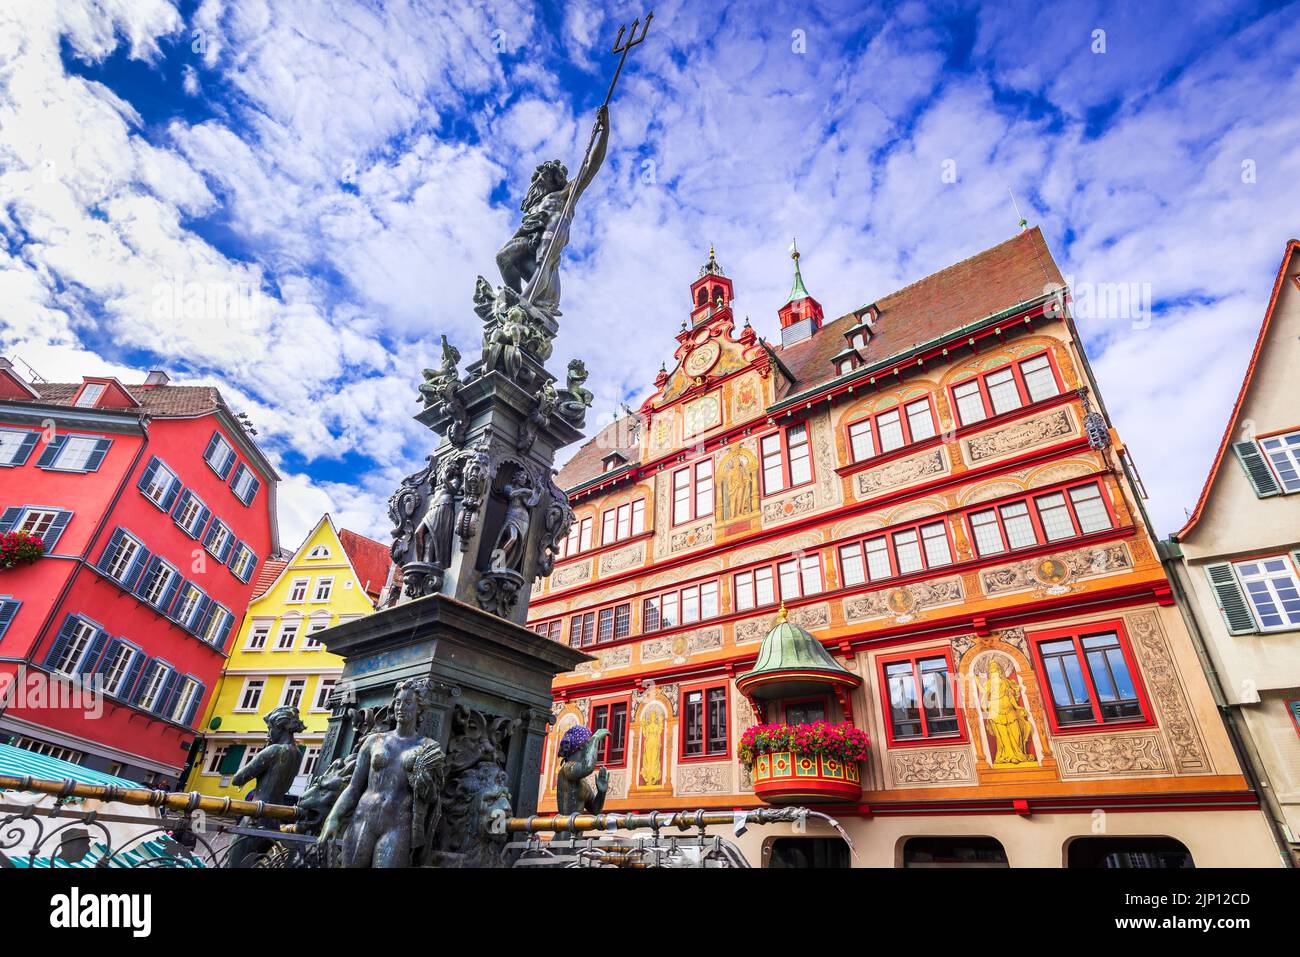 Tubingen, Germany. Traditional german small town with decorated half-timbered houses, Baden-Wurttemberg land. Stock Photo